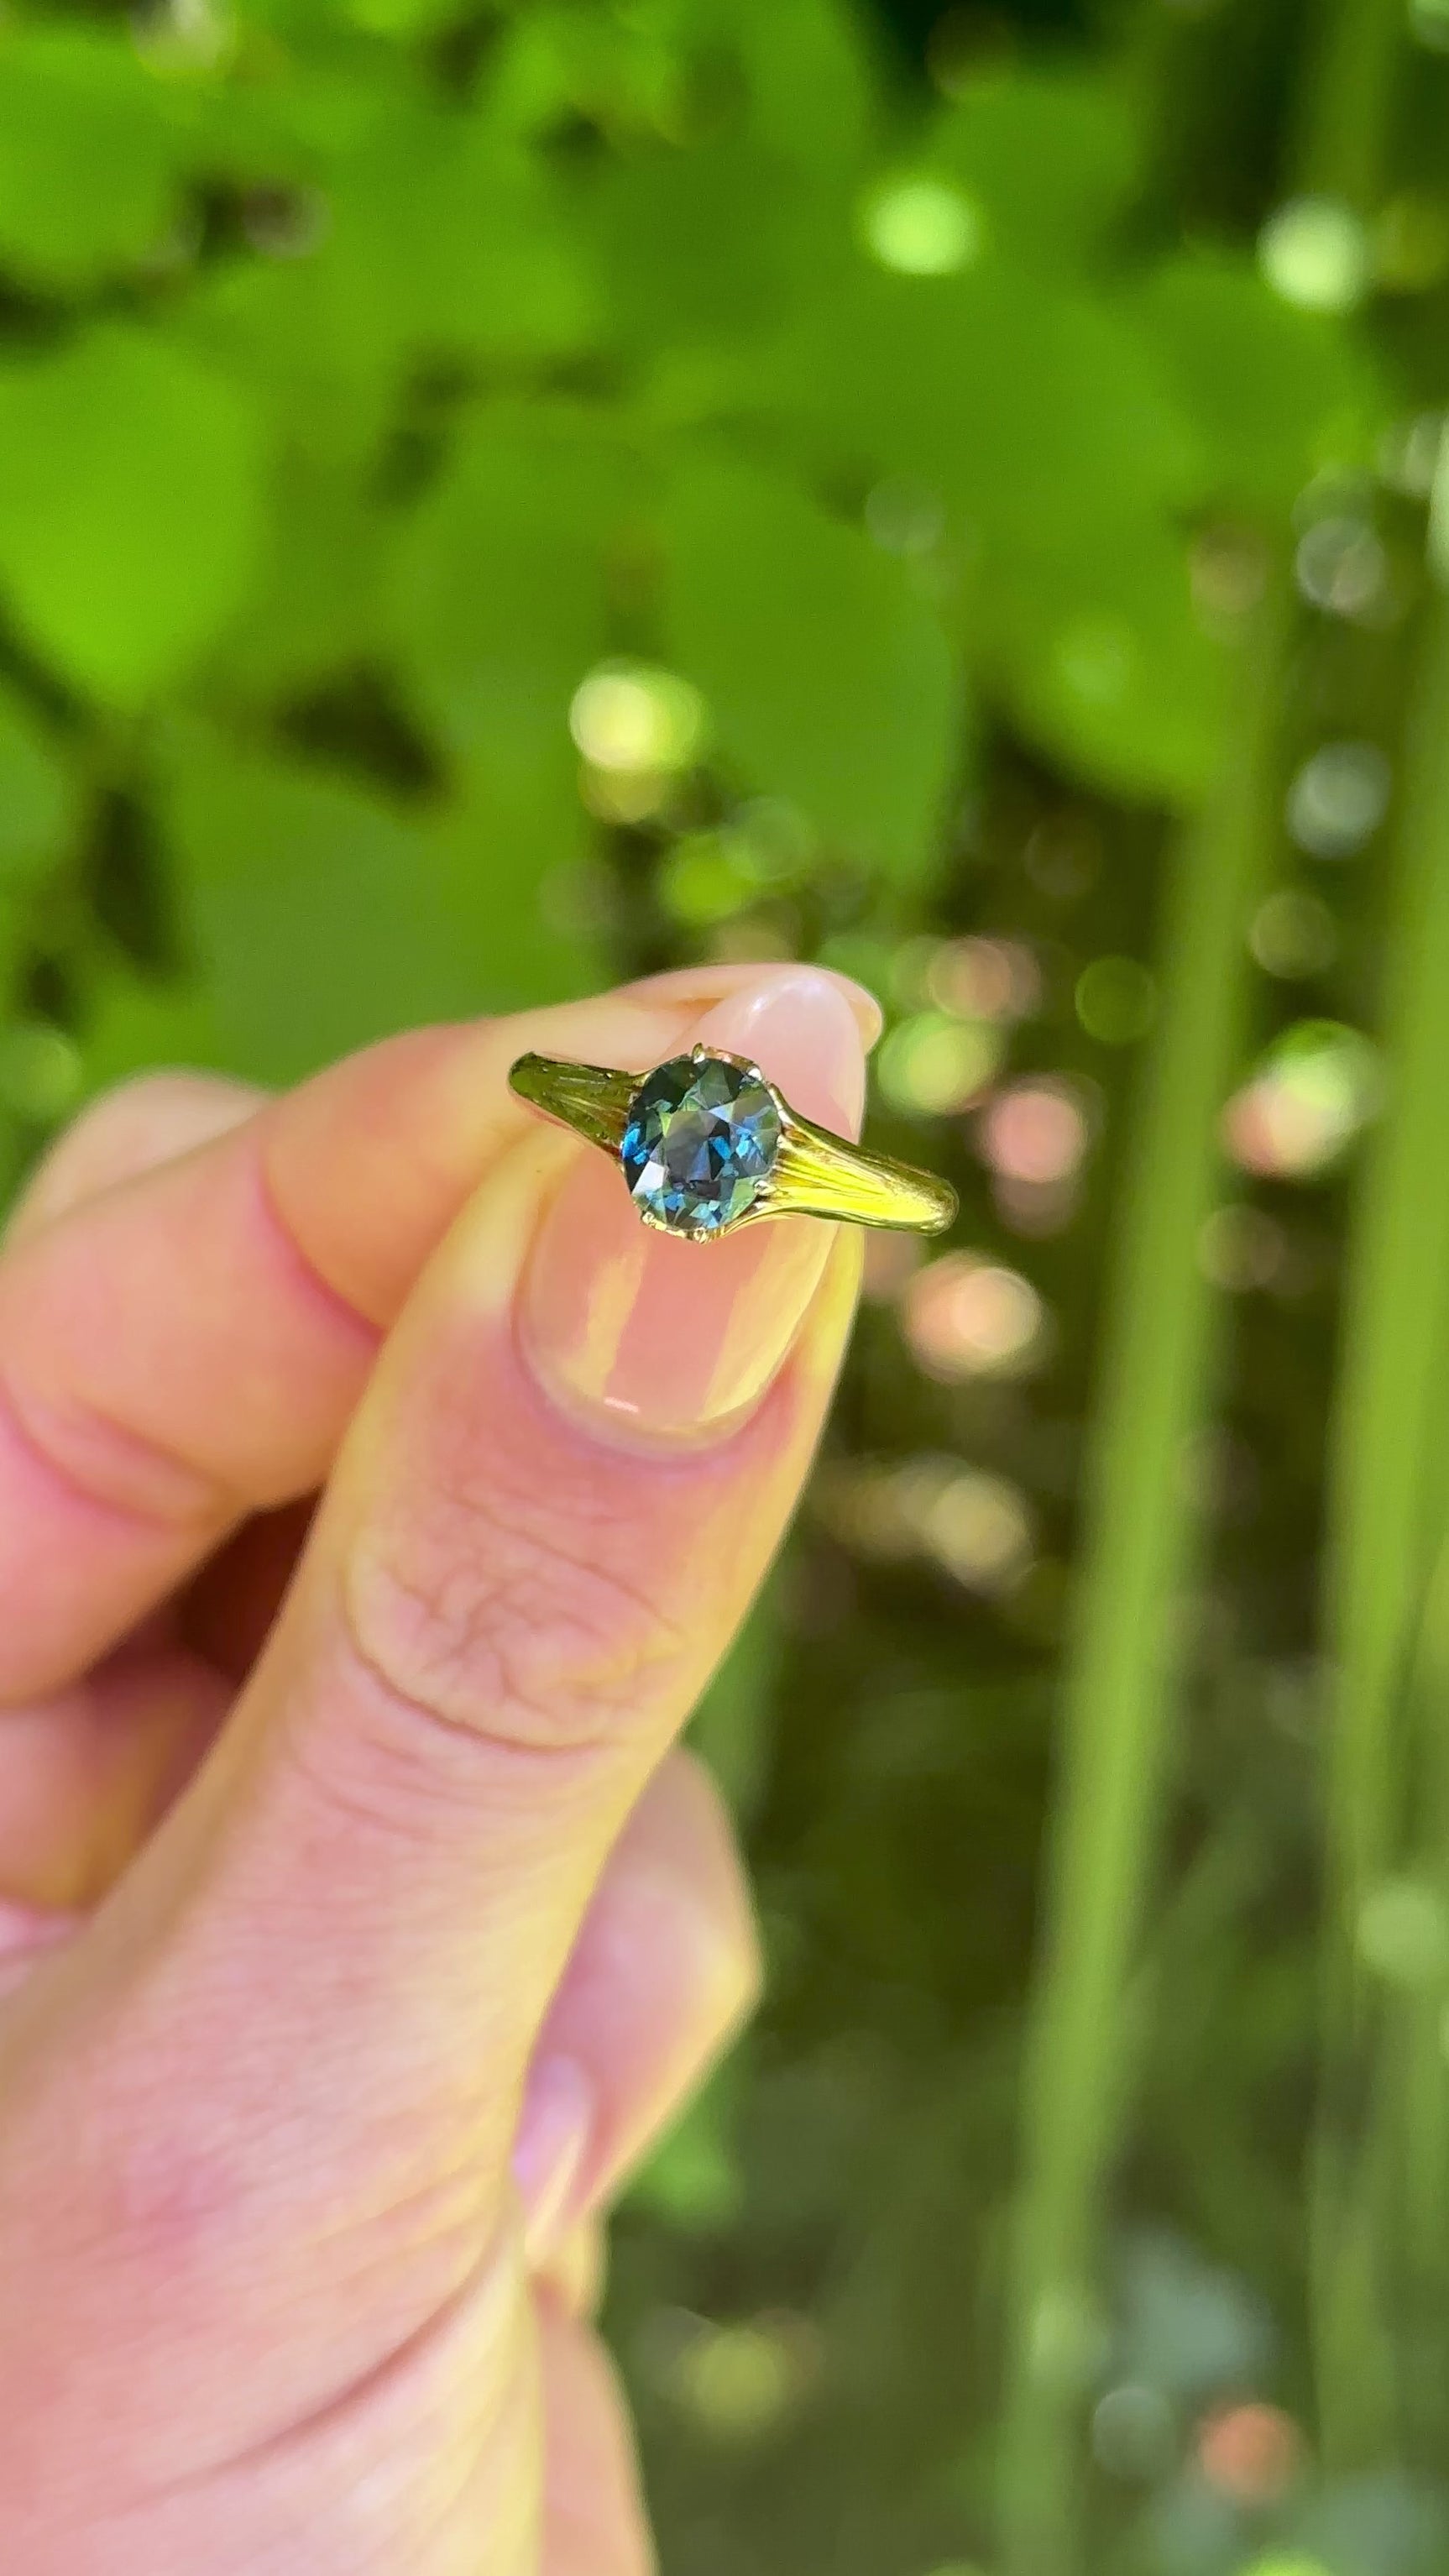 Antique, Edwardian Single-Stone Old Cut Teal Sapphire Ring, 18ct Rosy Yellow Gold held in fingers.